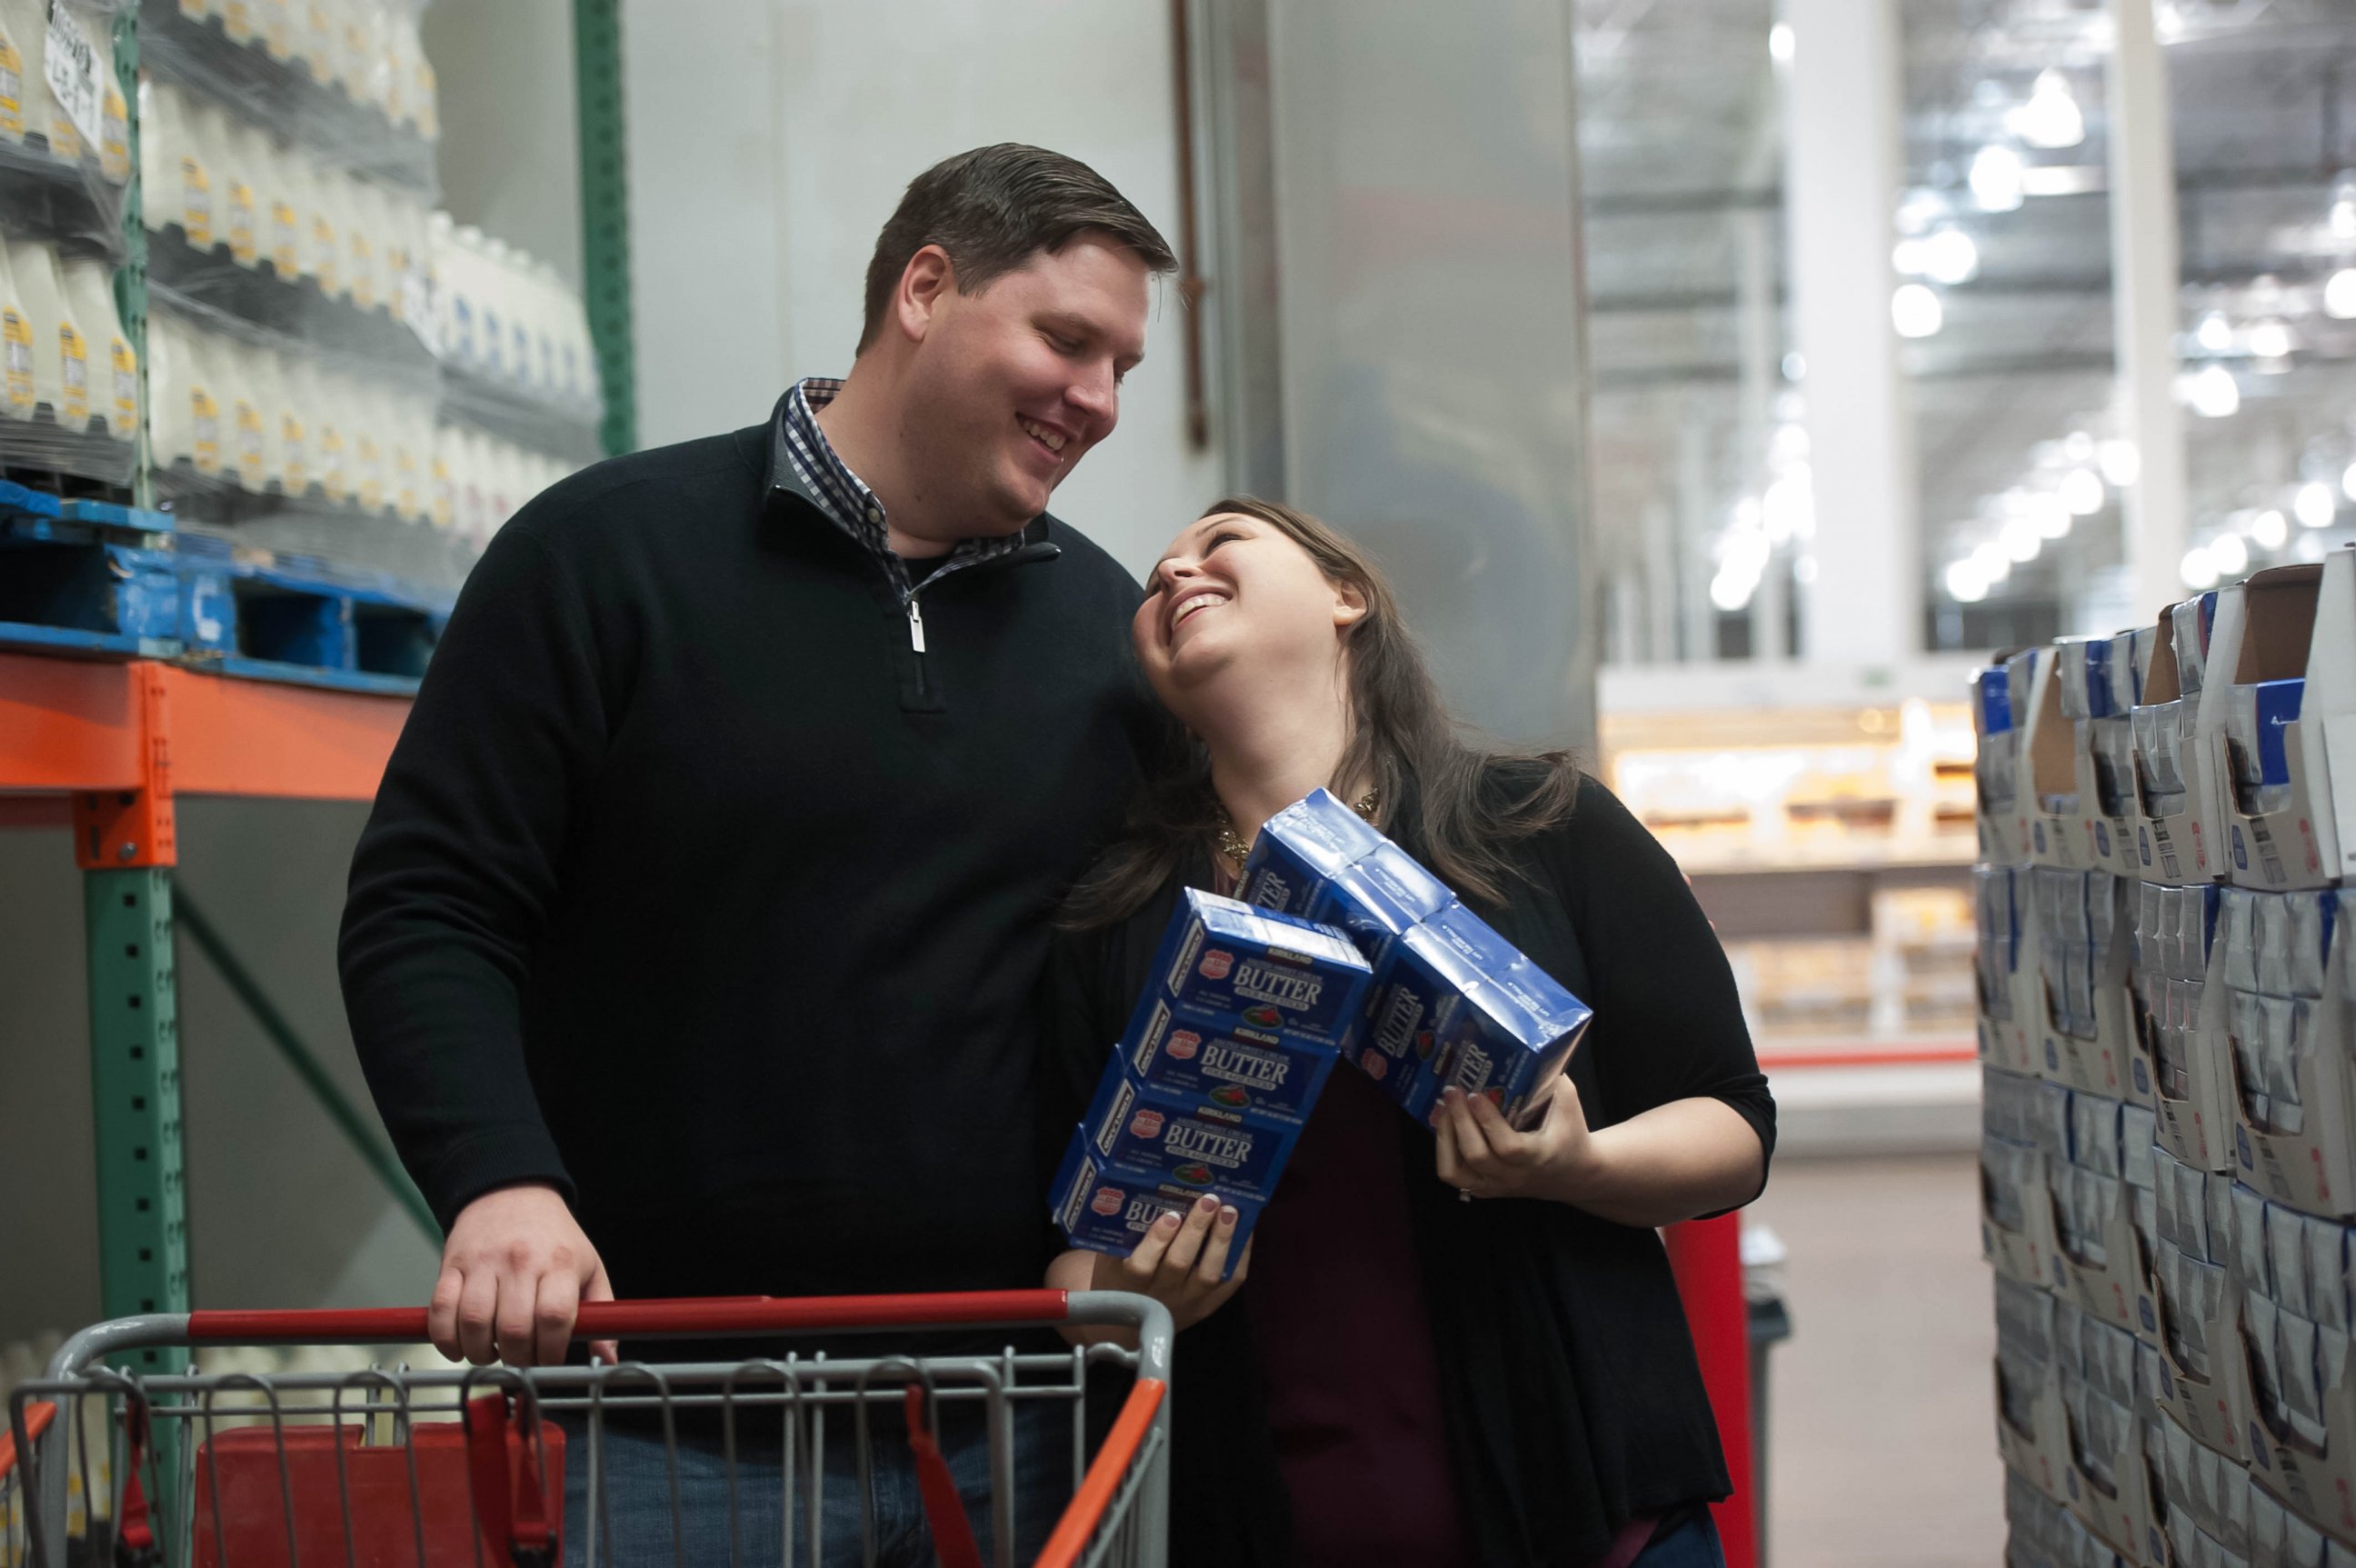 PHOTO: Couple’s Costco Engagement Photos Get Super-Sized Attention Online